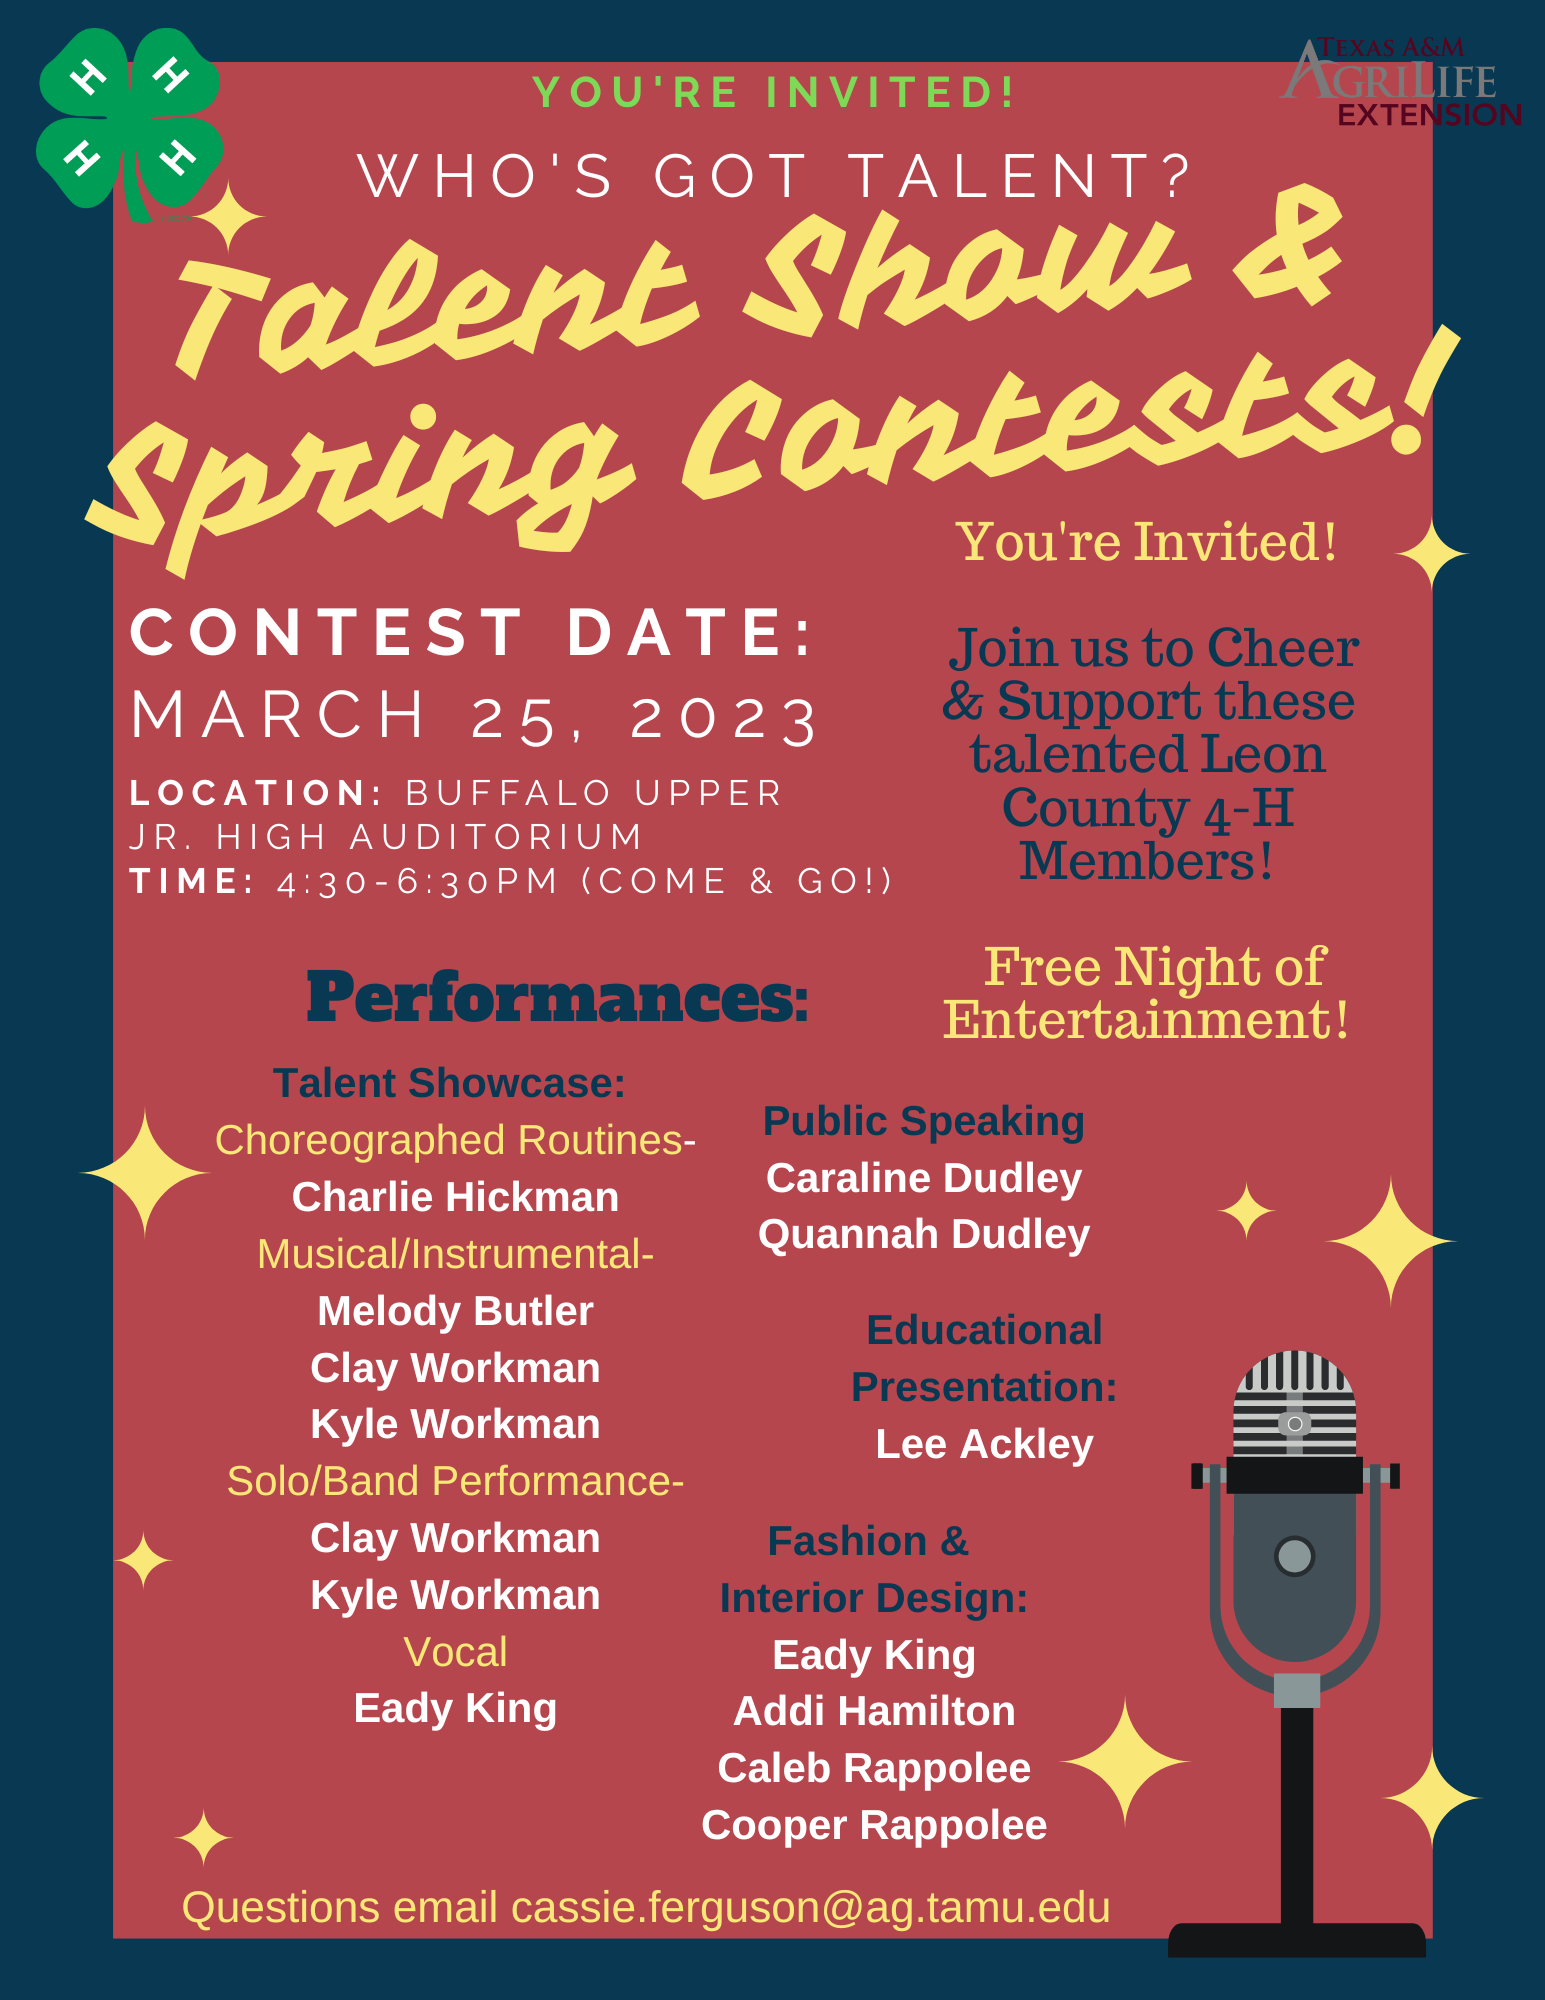 Youre Invited! 4-H Talent Show & Spring Contests- March 25th